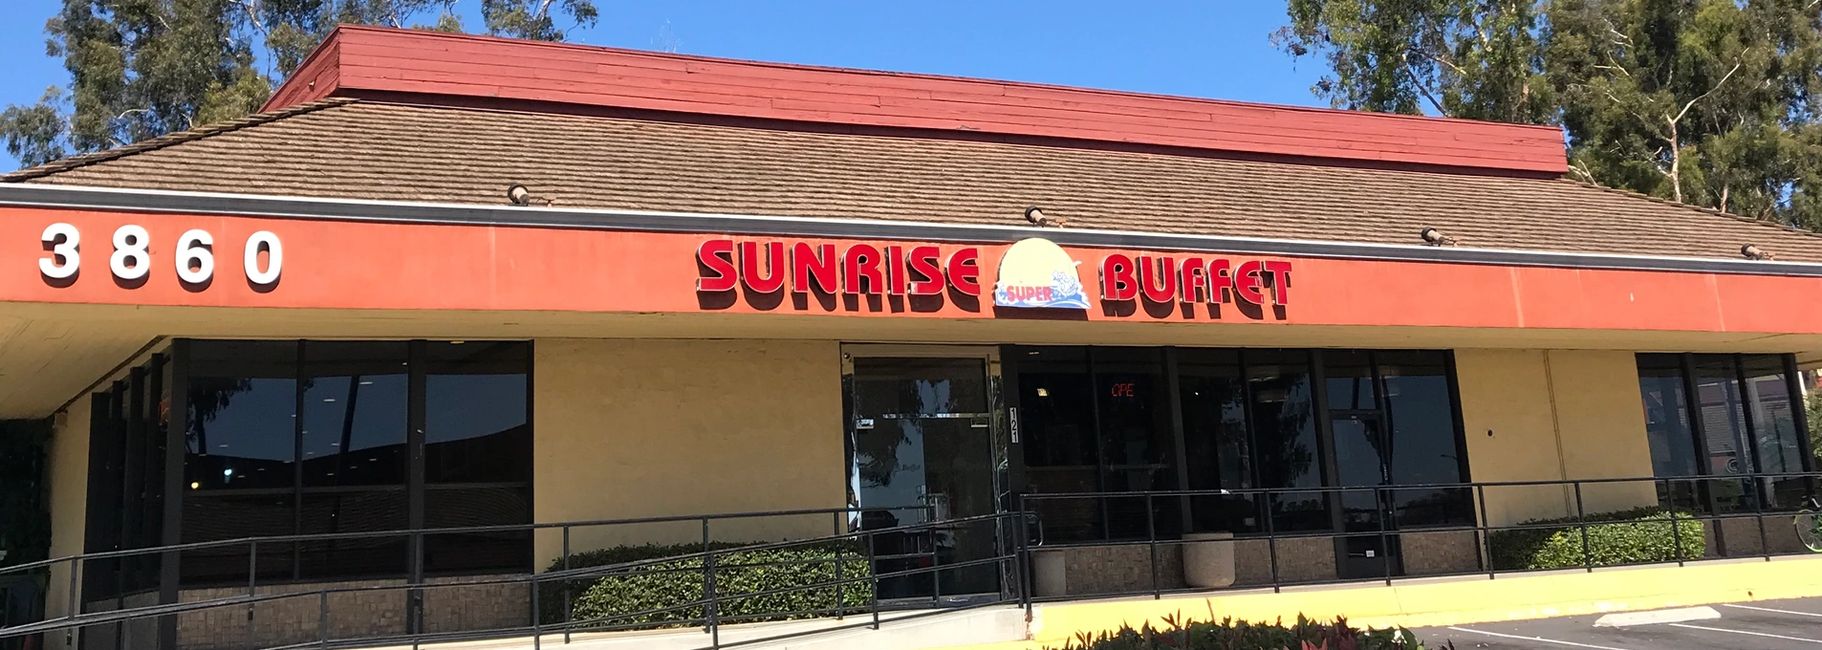 Sunrise Buffet | All You Can Eat | Coupon | San Diego, CA